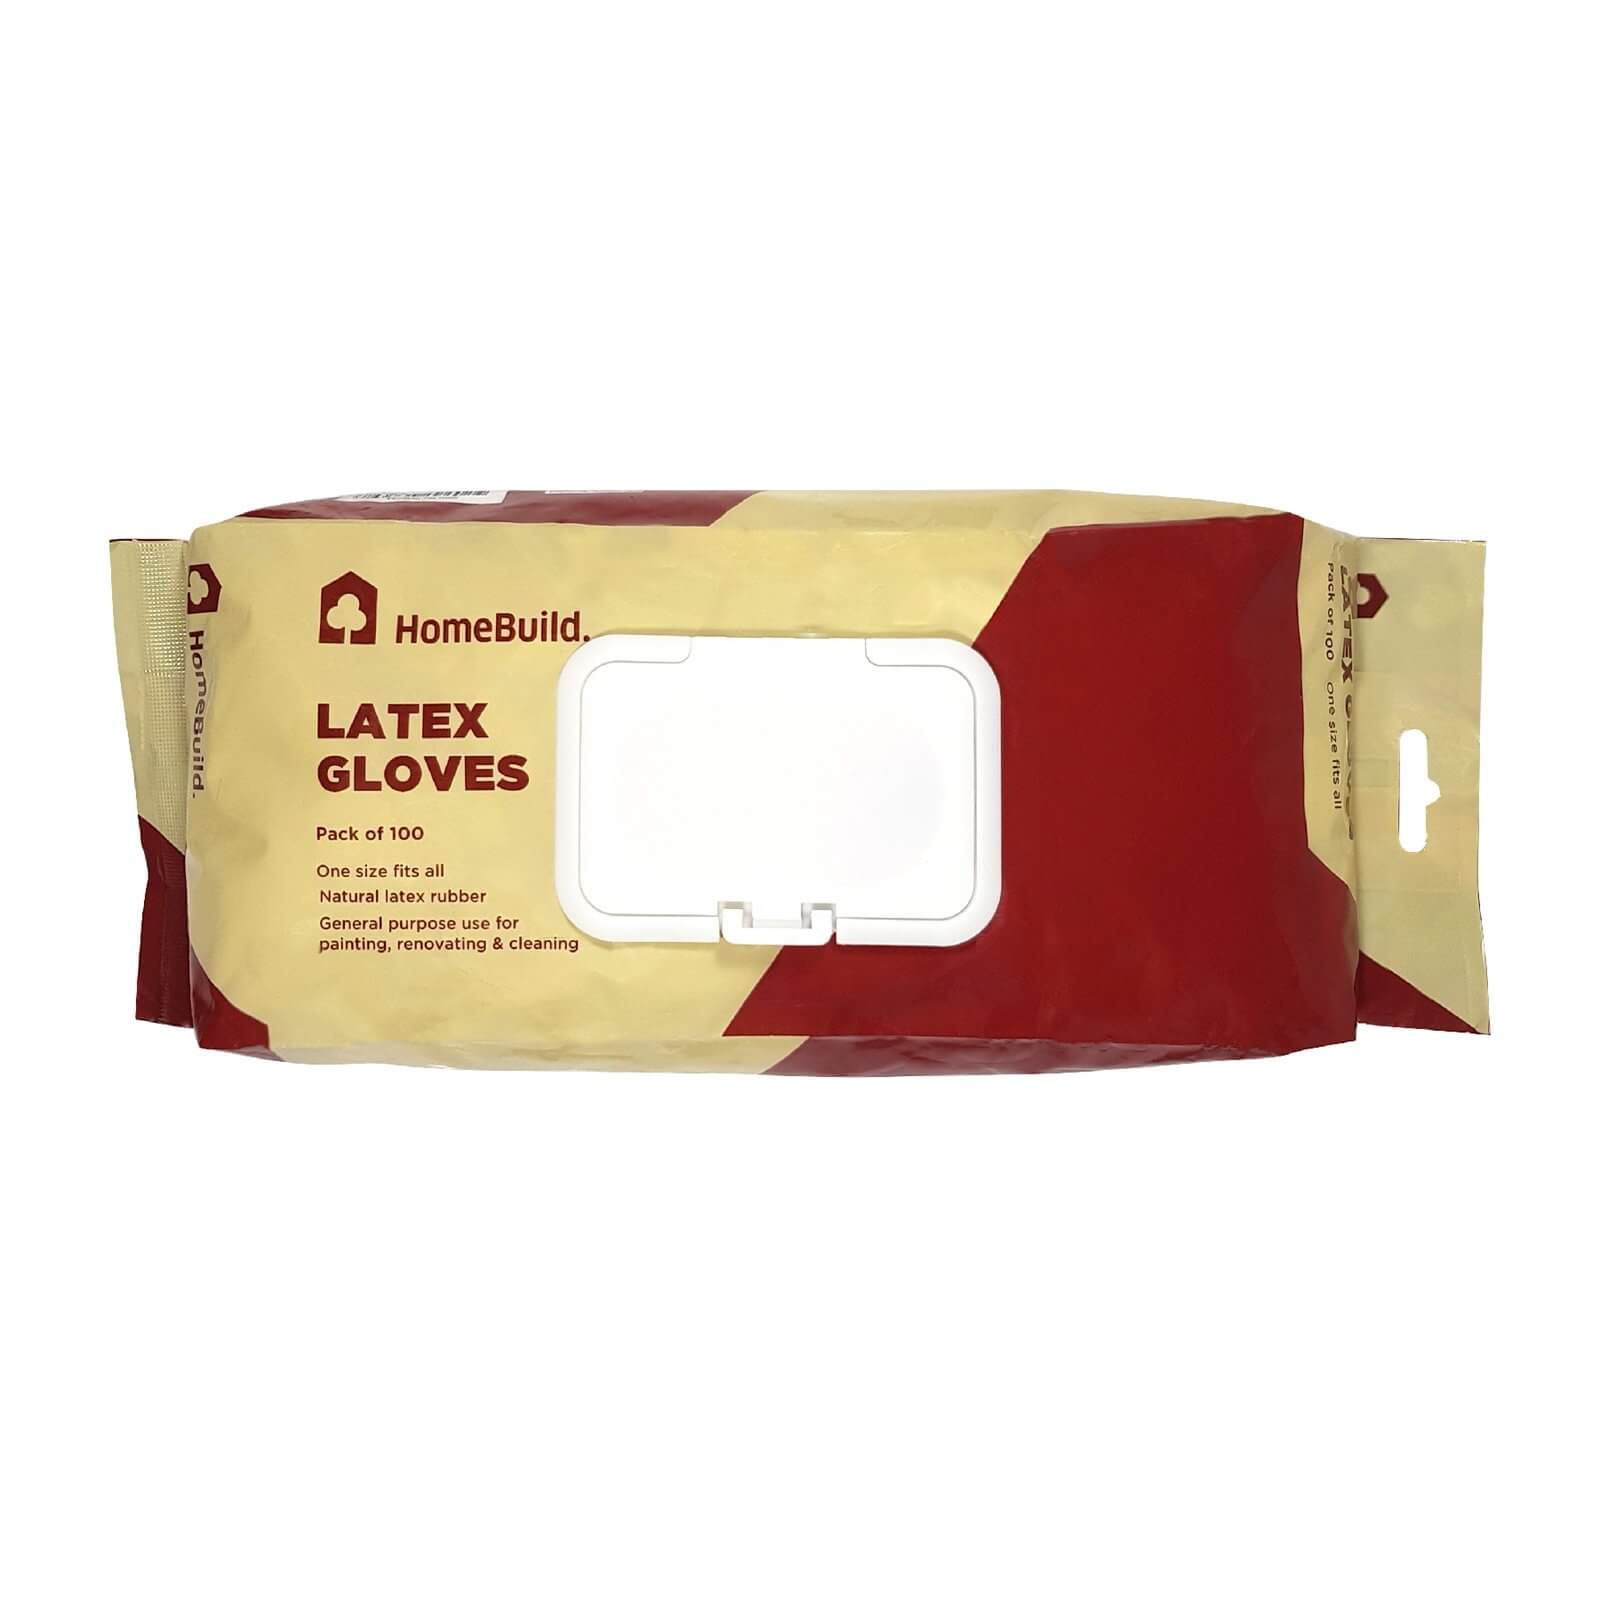 HomeBuild Disposable Latex Gloves - 100 Pack